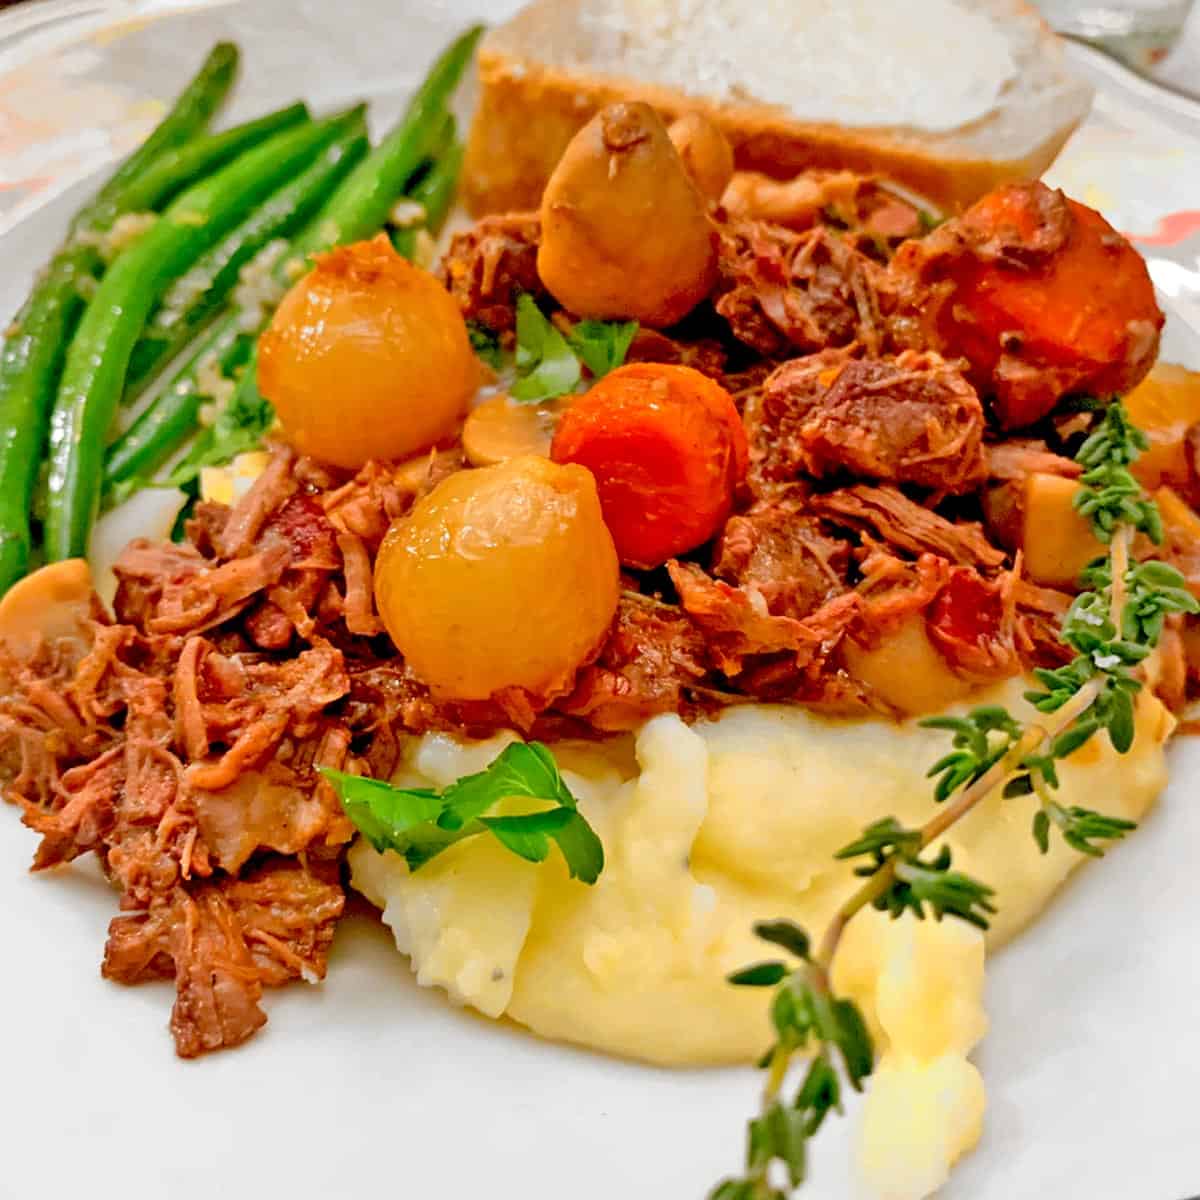 Beef stew over mashed potatoes with green beans.